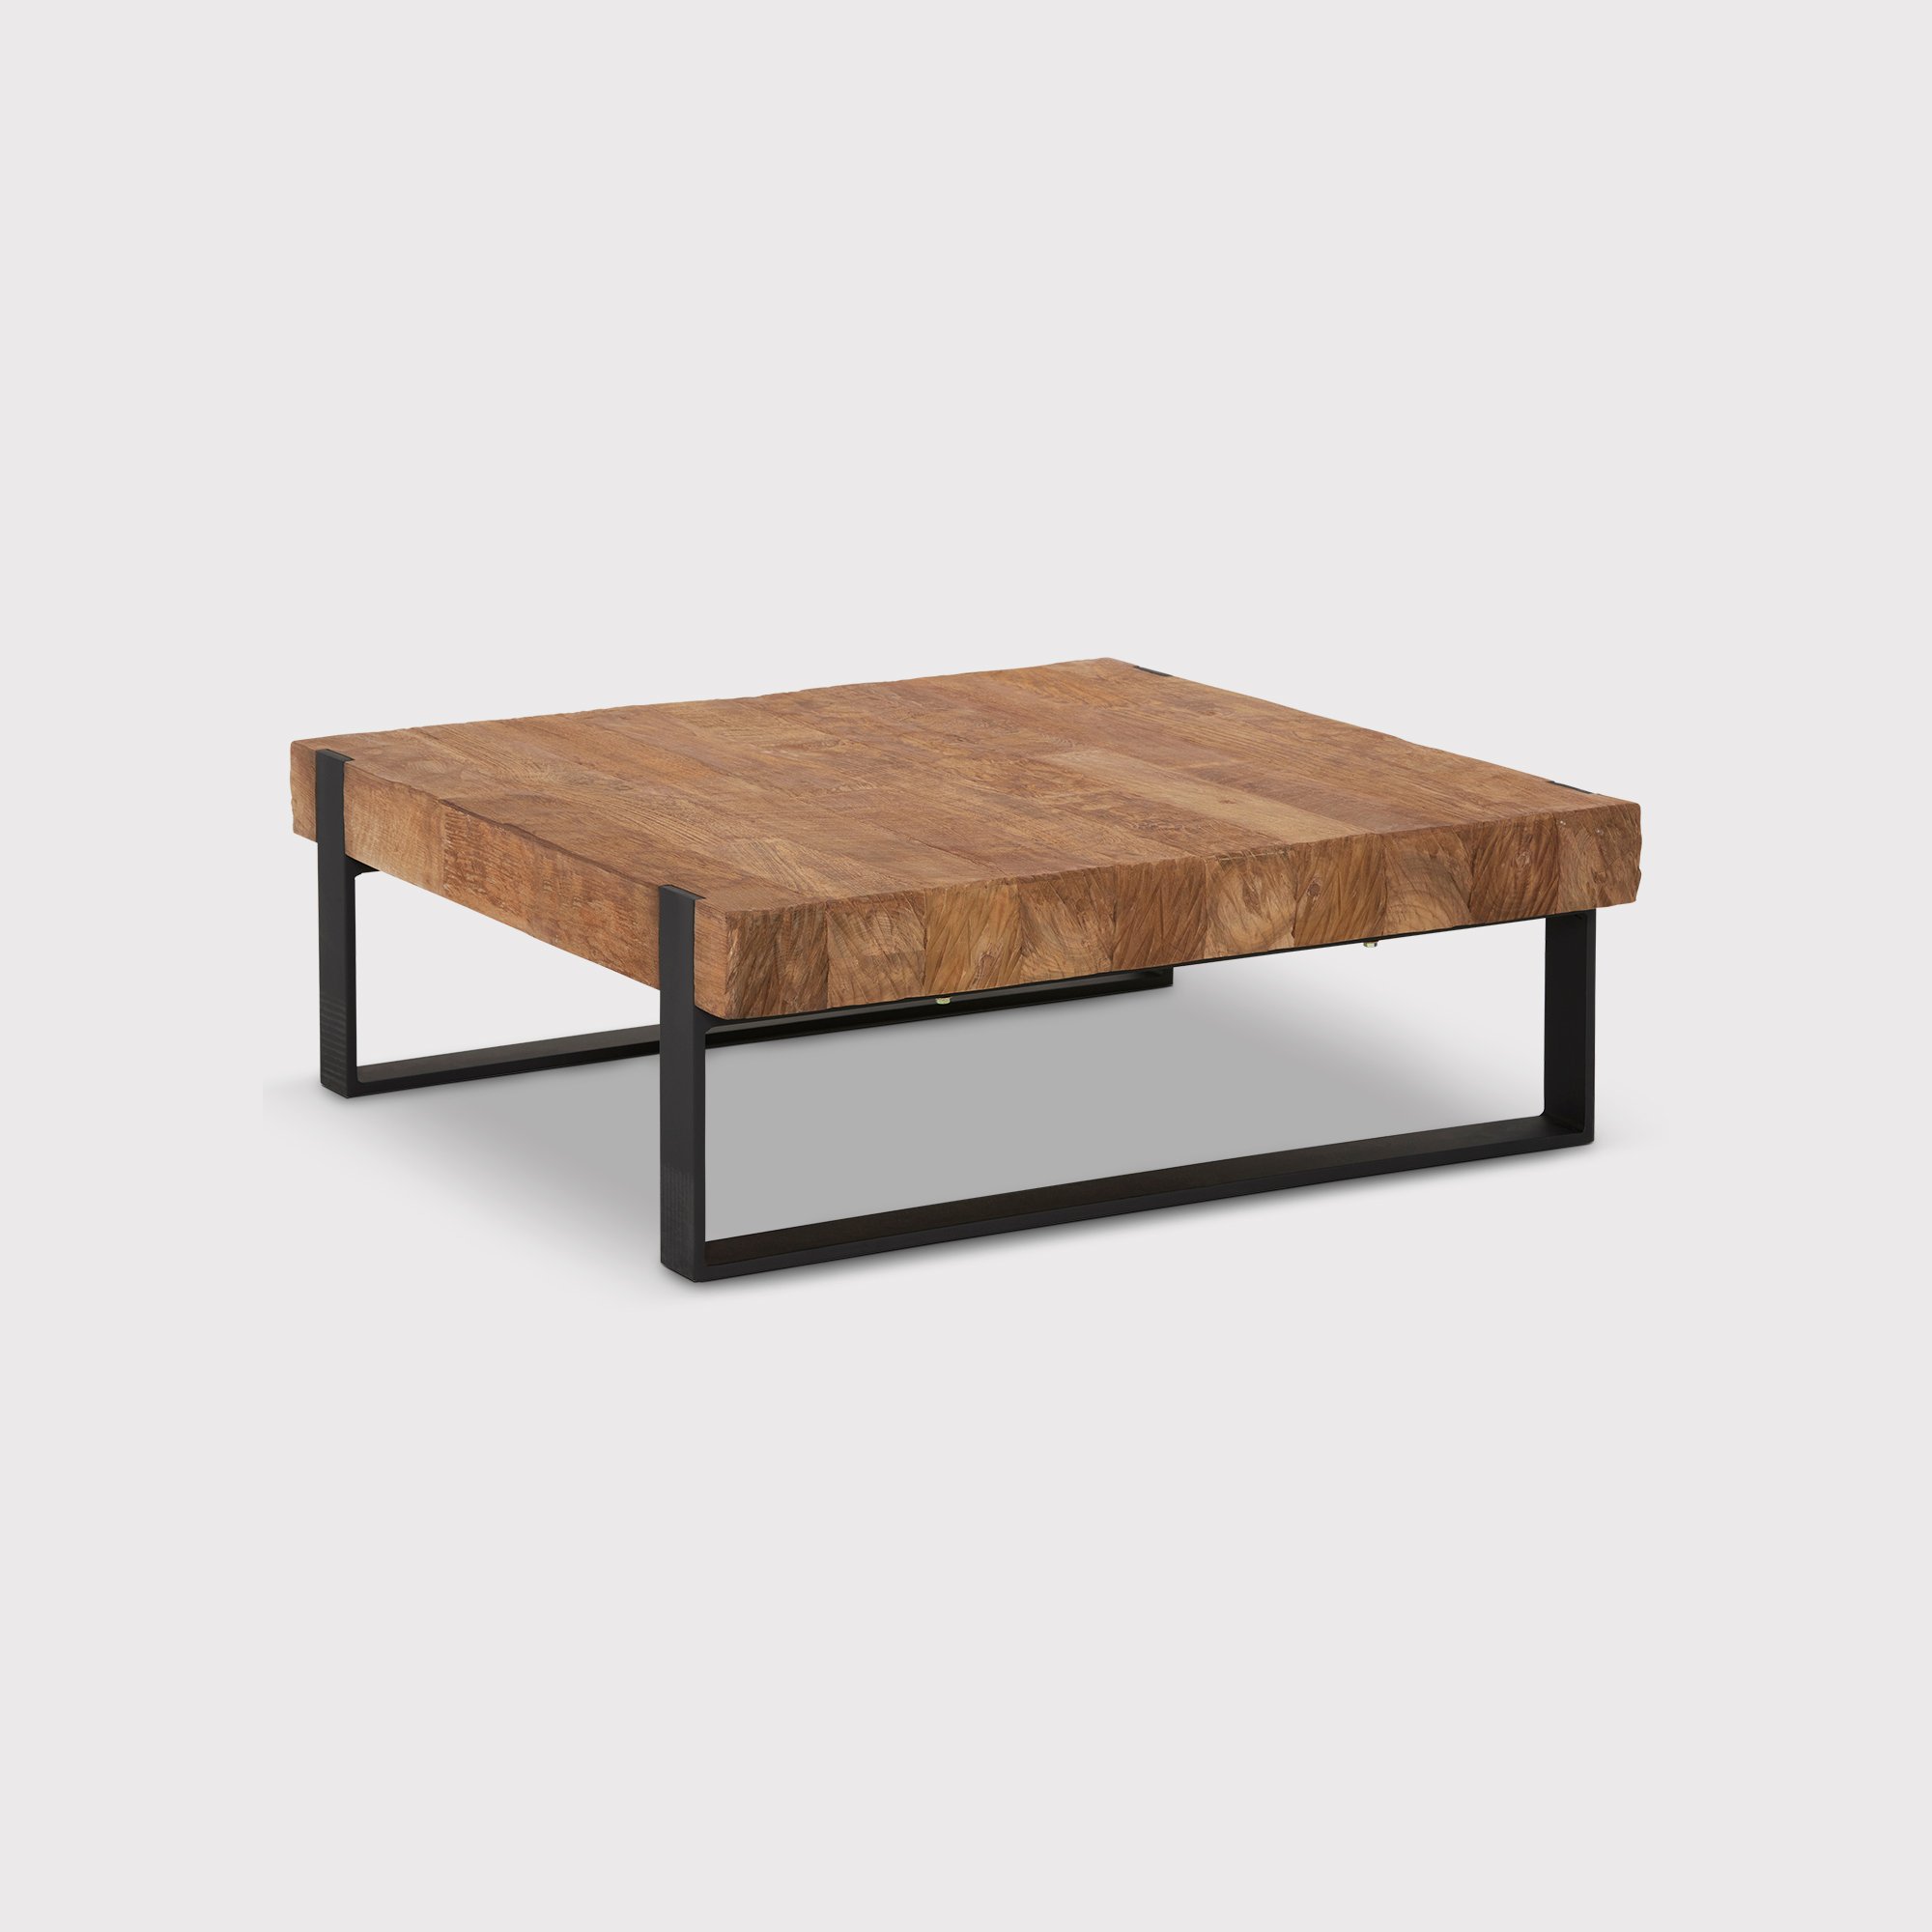 Tegal Coffee Table 100cm, Brown | Barker & Stonehouse